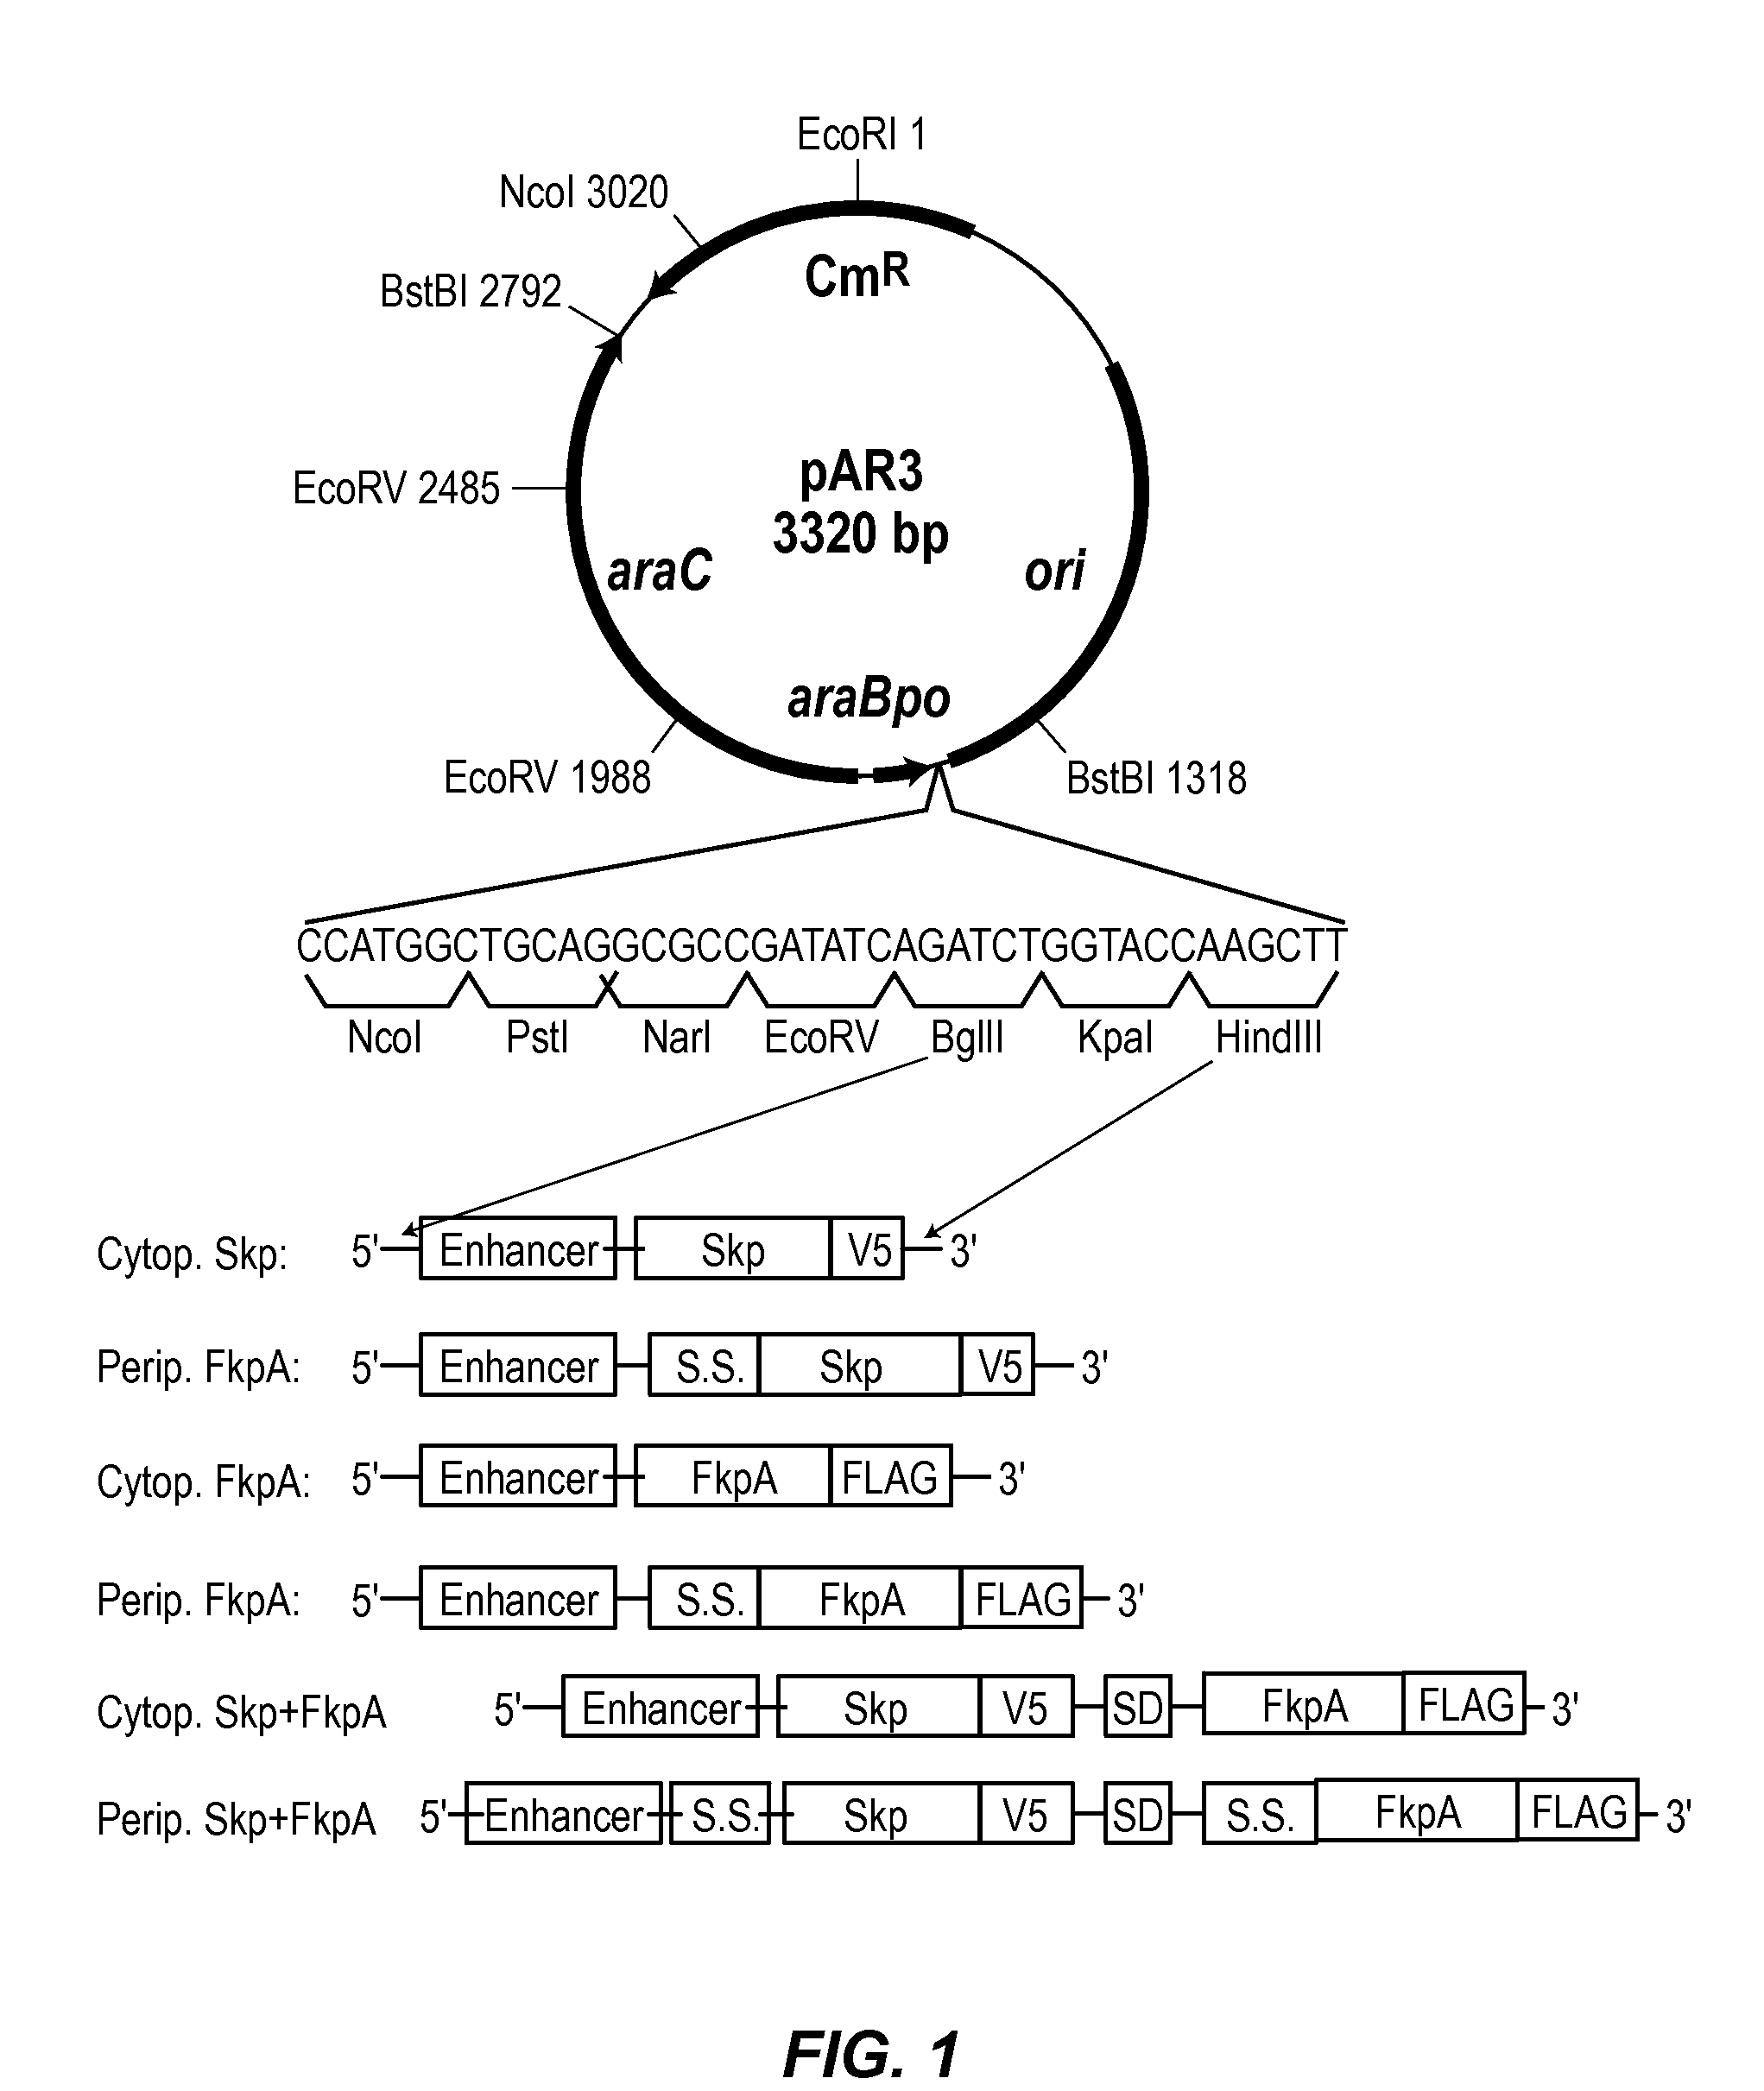 Methods and materials for enhancing functional protein expression in bacteria